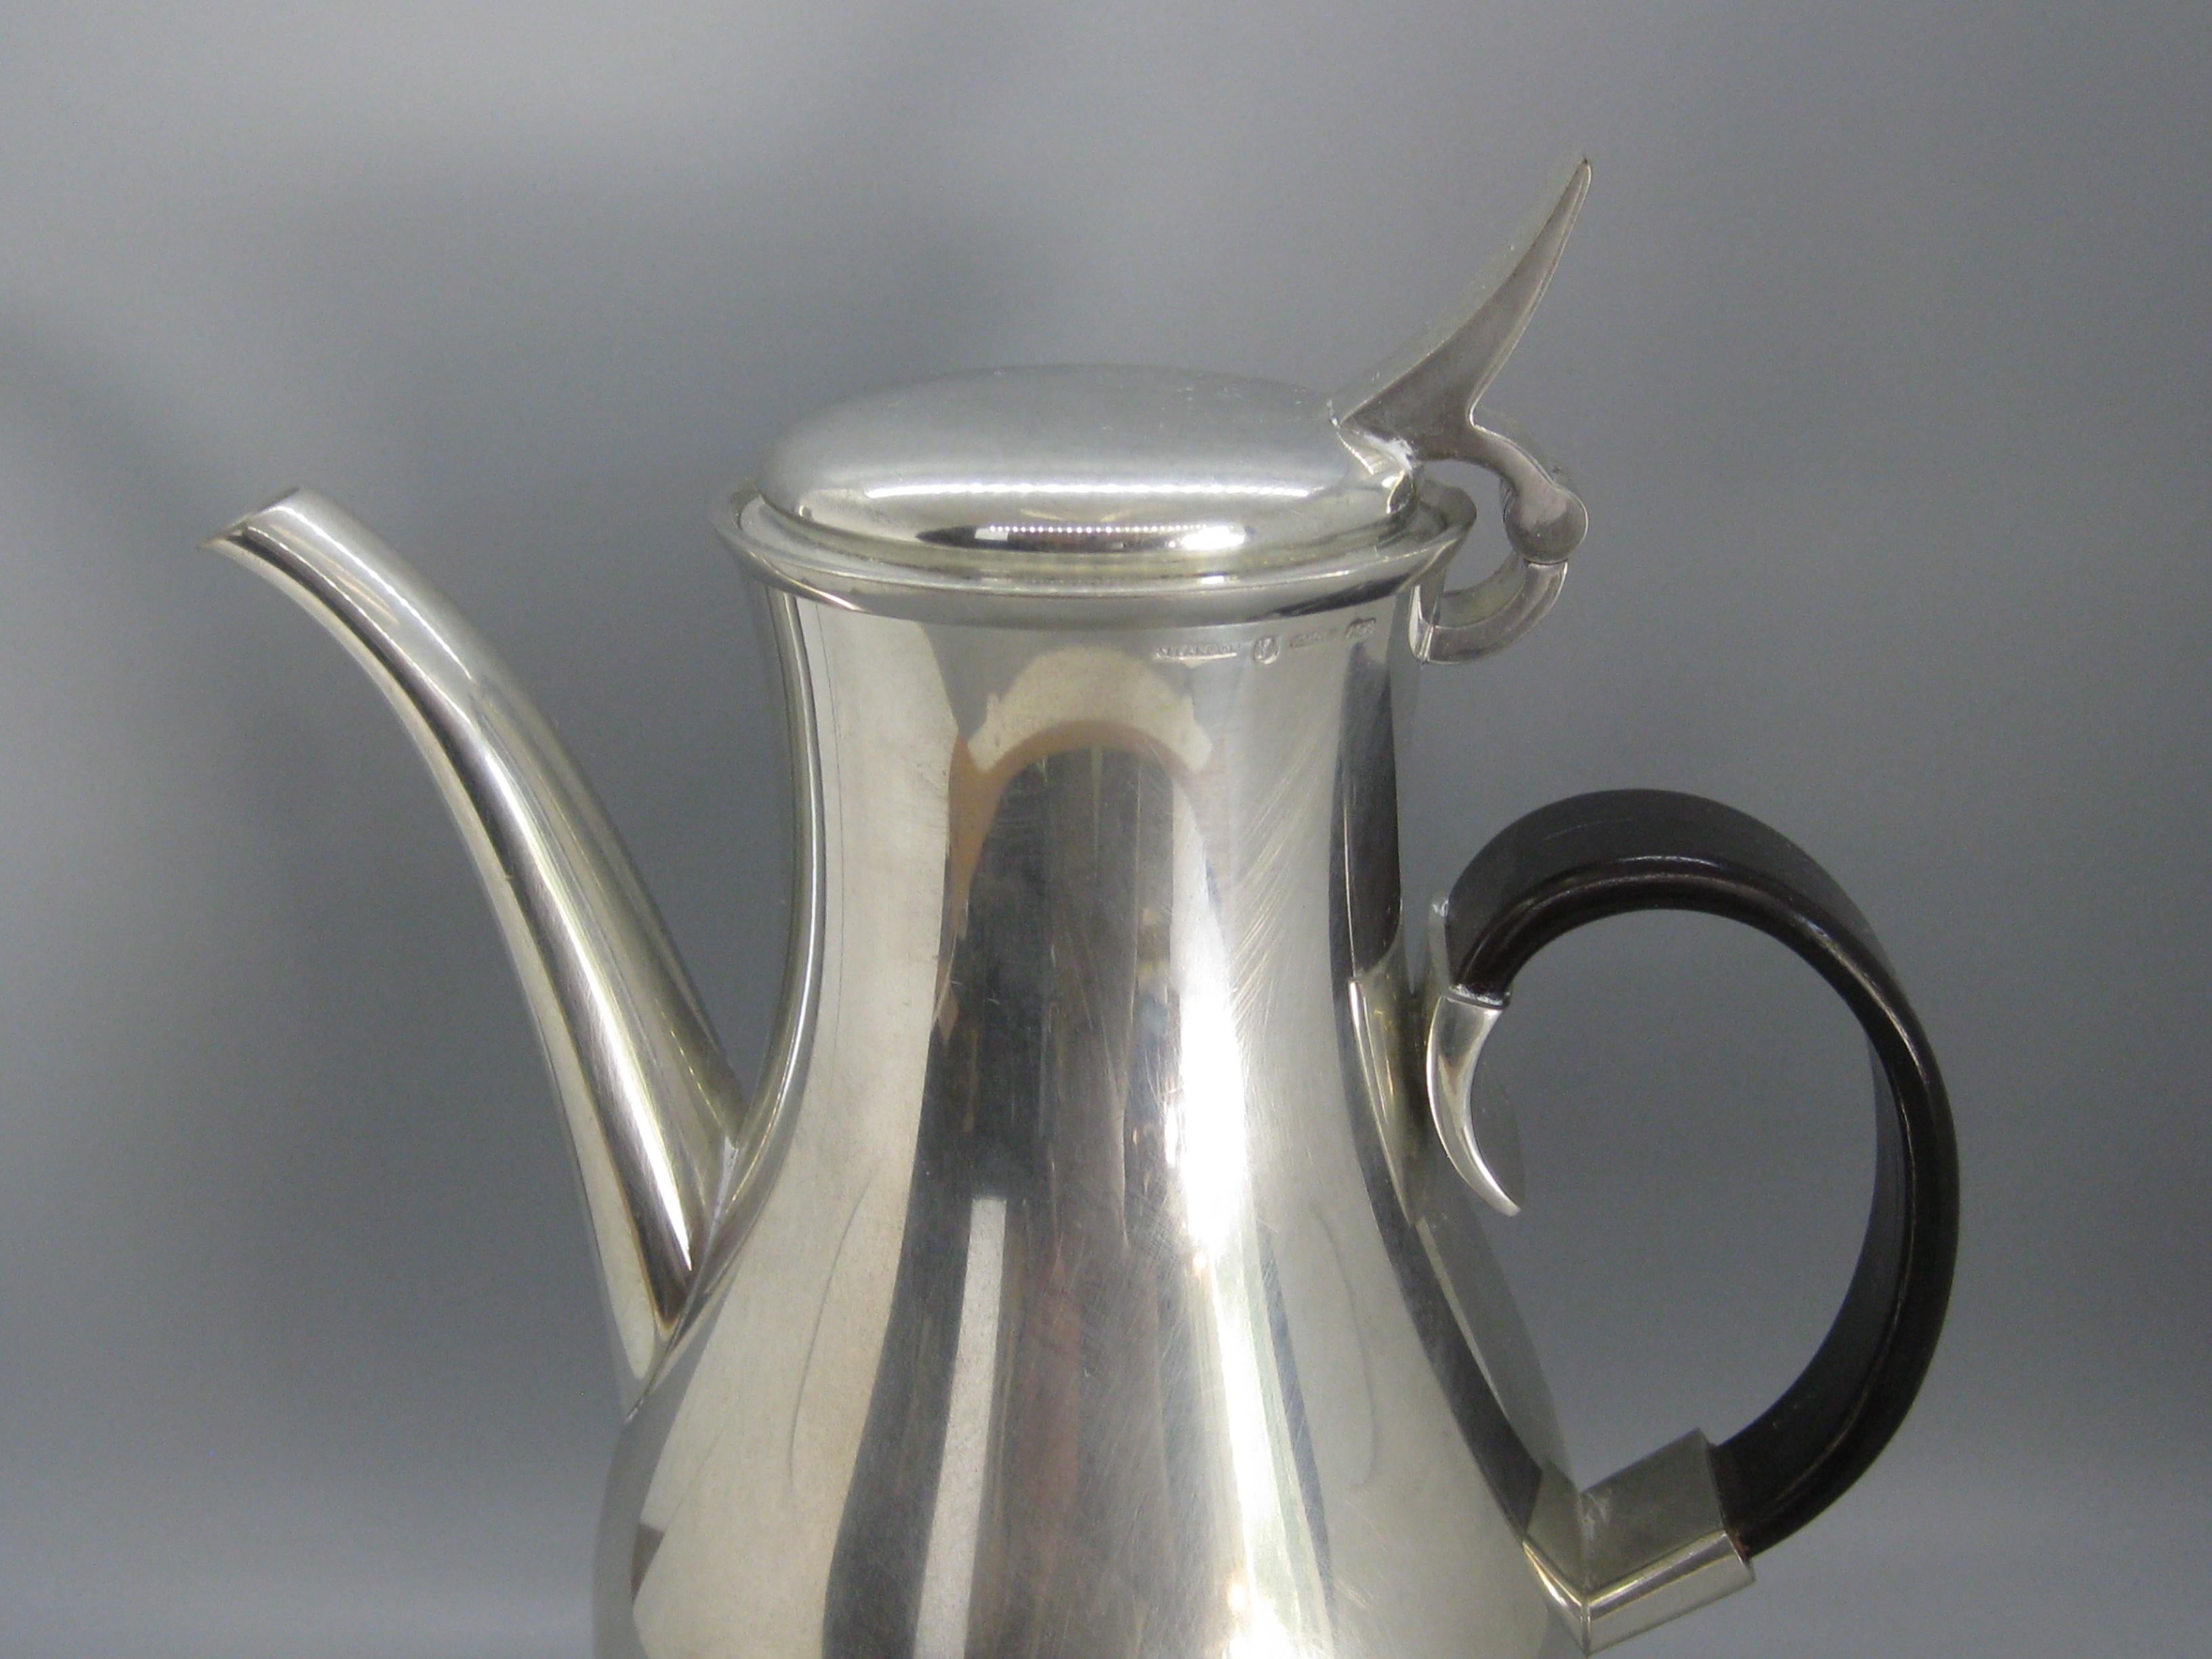 Wonderful vintage mid century designed Royal Selangor coffee pot. Designed by Gerald Benney during the 1960's. This tea pot dates from the early 1990's. Wonderful form and design. Has a bent rosewood handle. The tea pot is made of solid pewter. In